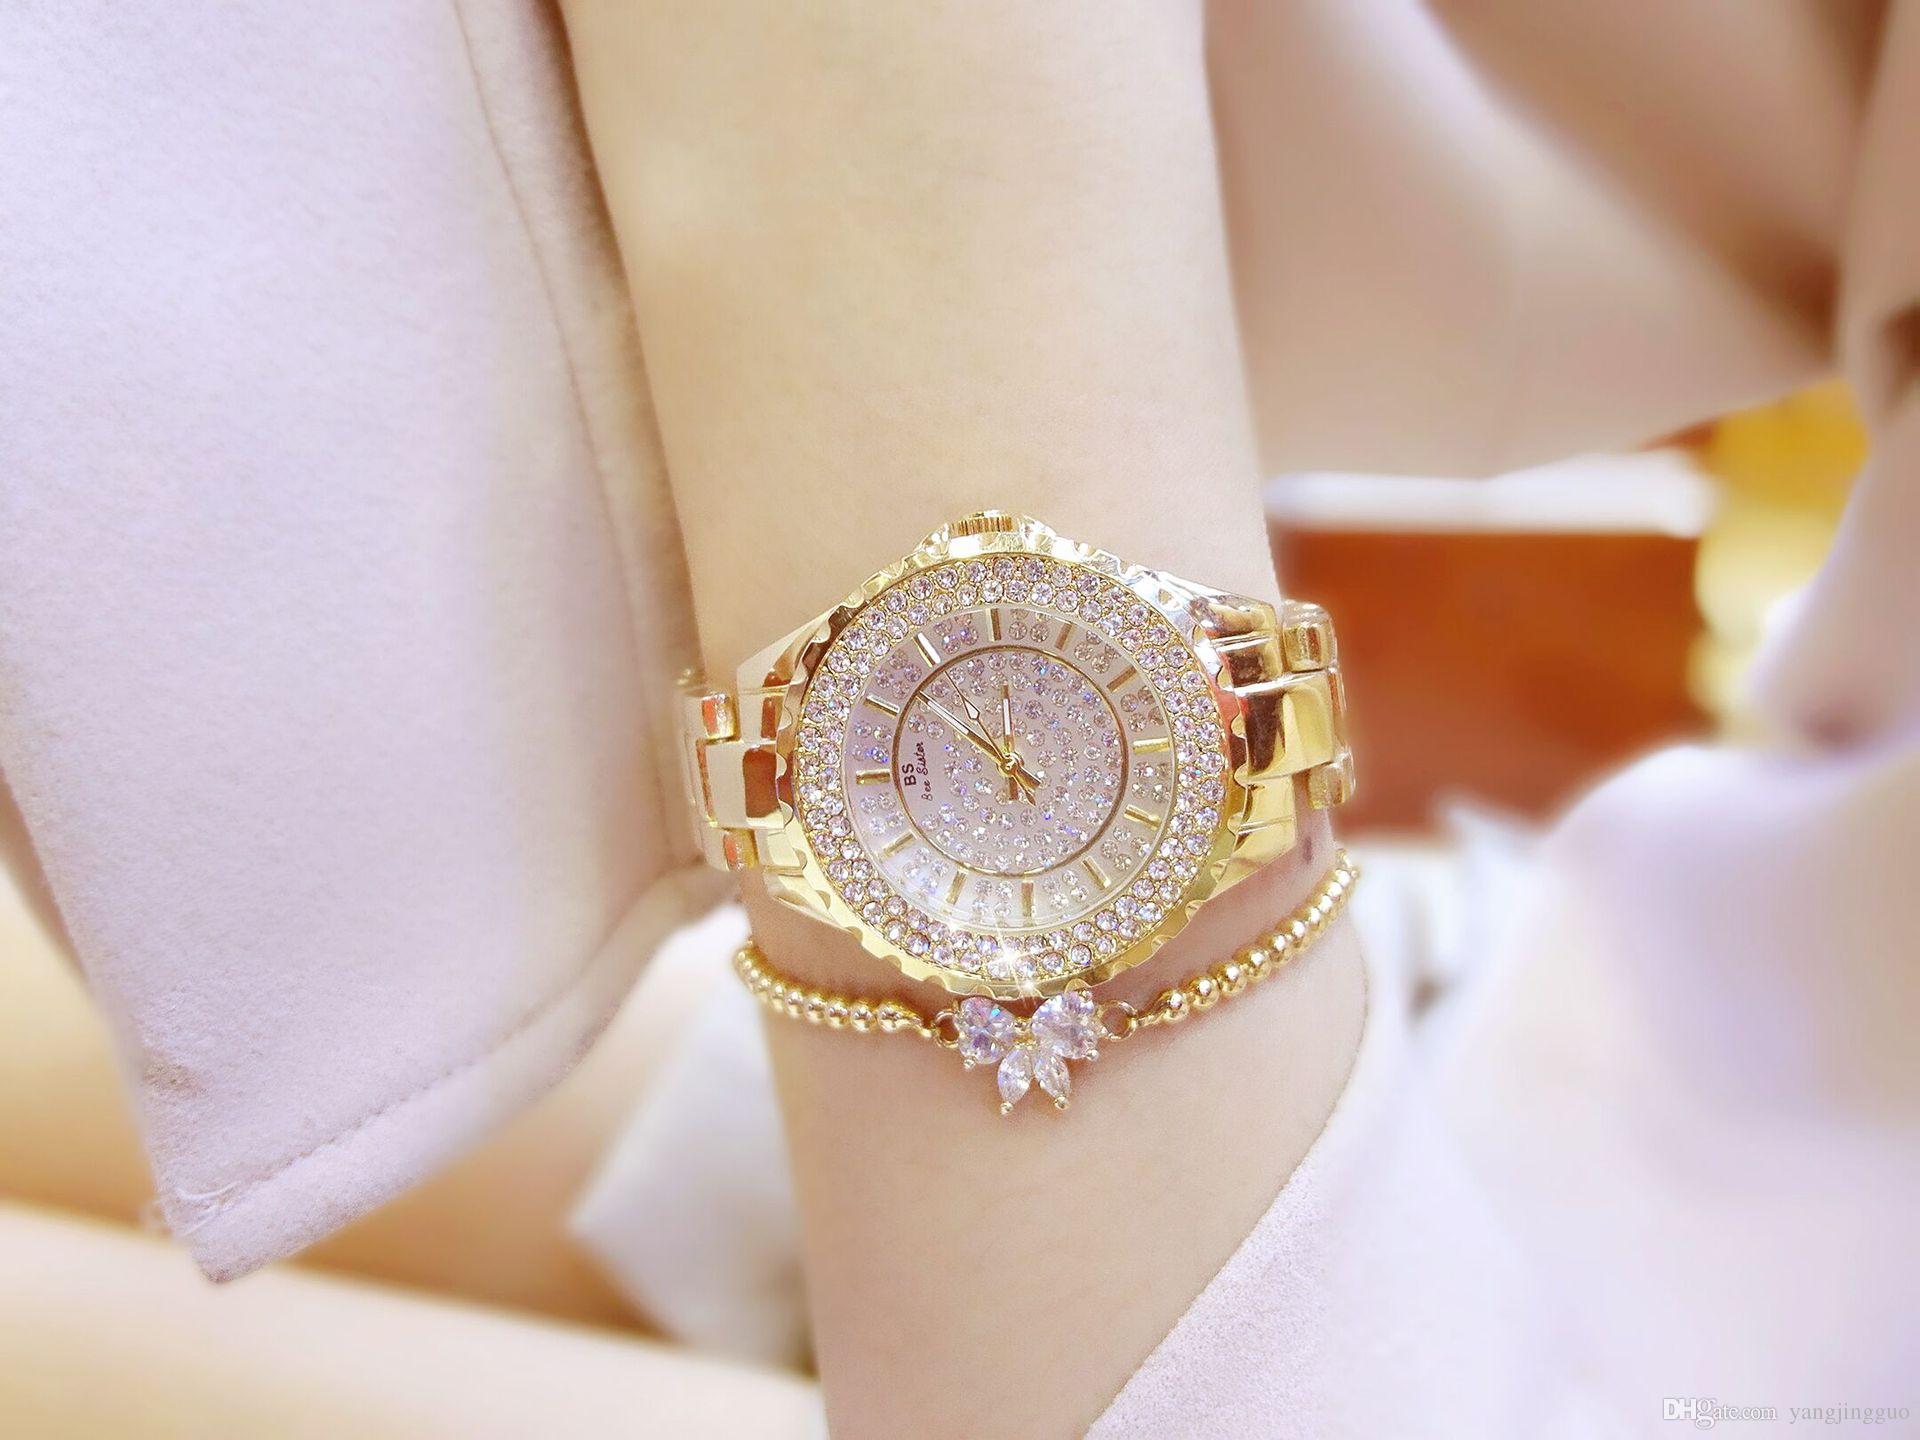 BS New Hot Watch Luxury Watch List Custom Full Diamond Women Table FA0280 Gold, Silver Optional Free Delivery High Quality Watches Watches For Less From Yangjingguo, $33.23. DHgate.Com